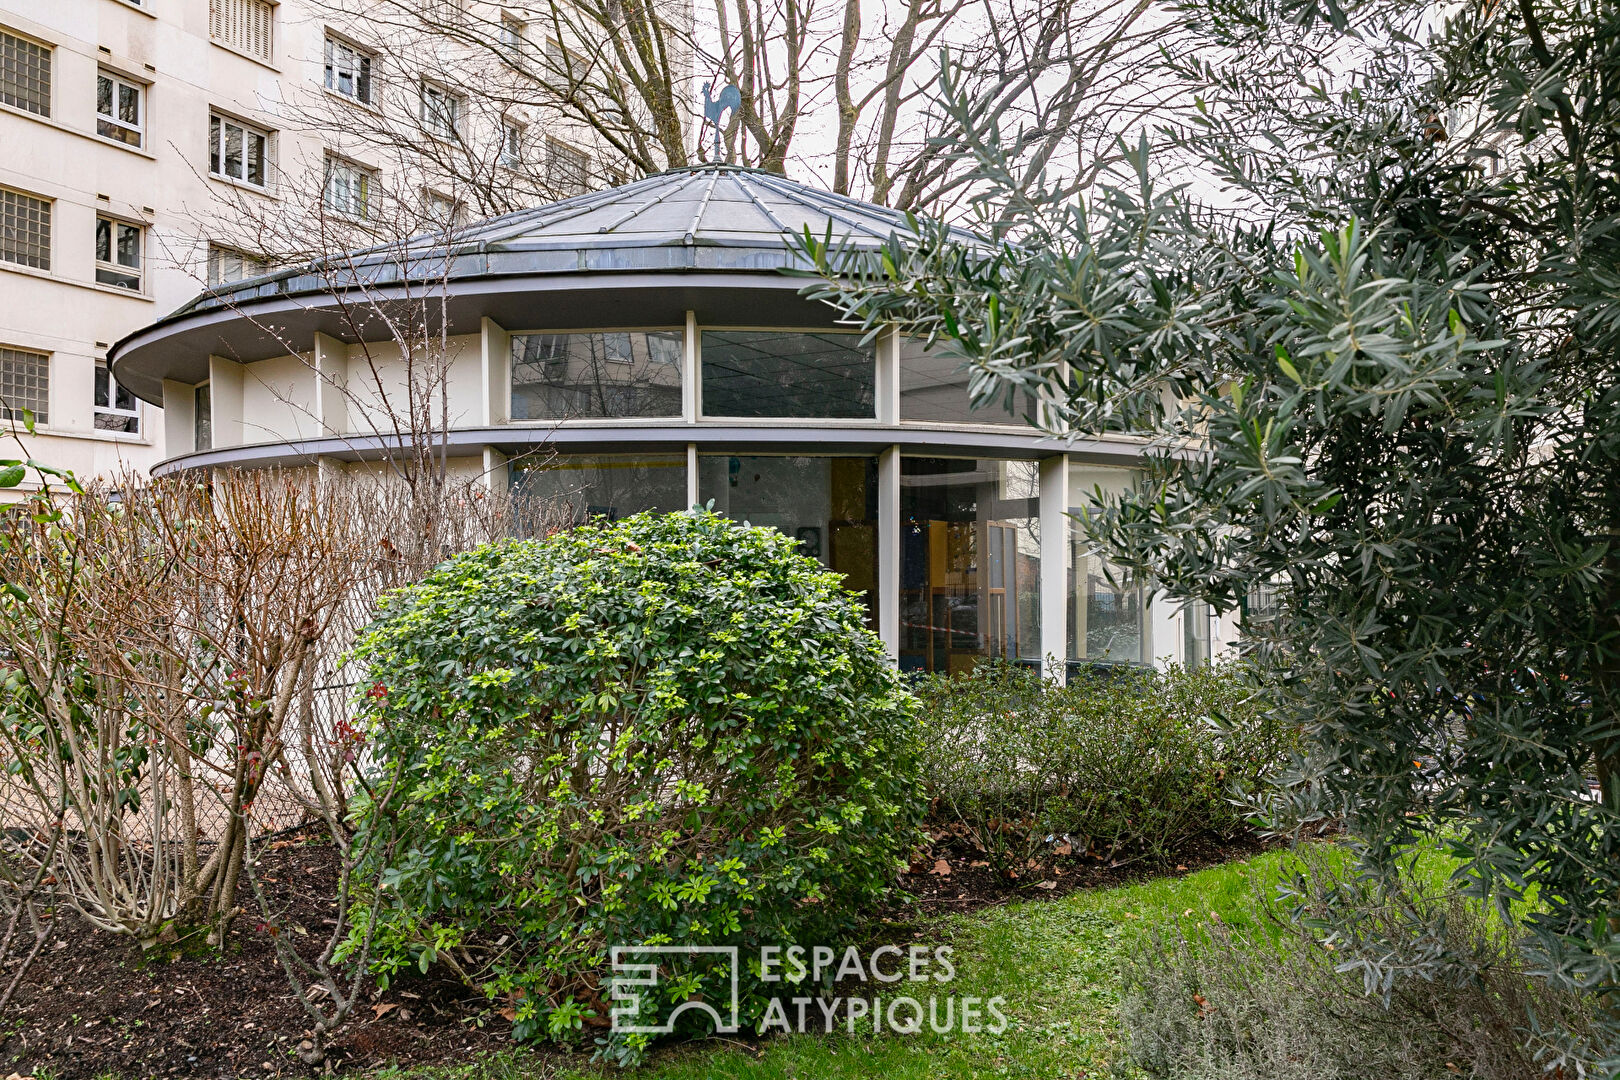 15th arrondissement, unusual and atypical house Saint-Charles district